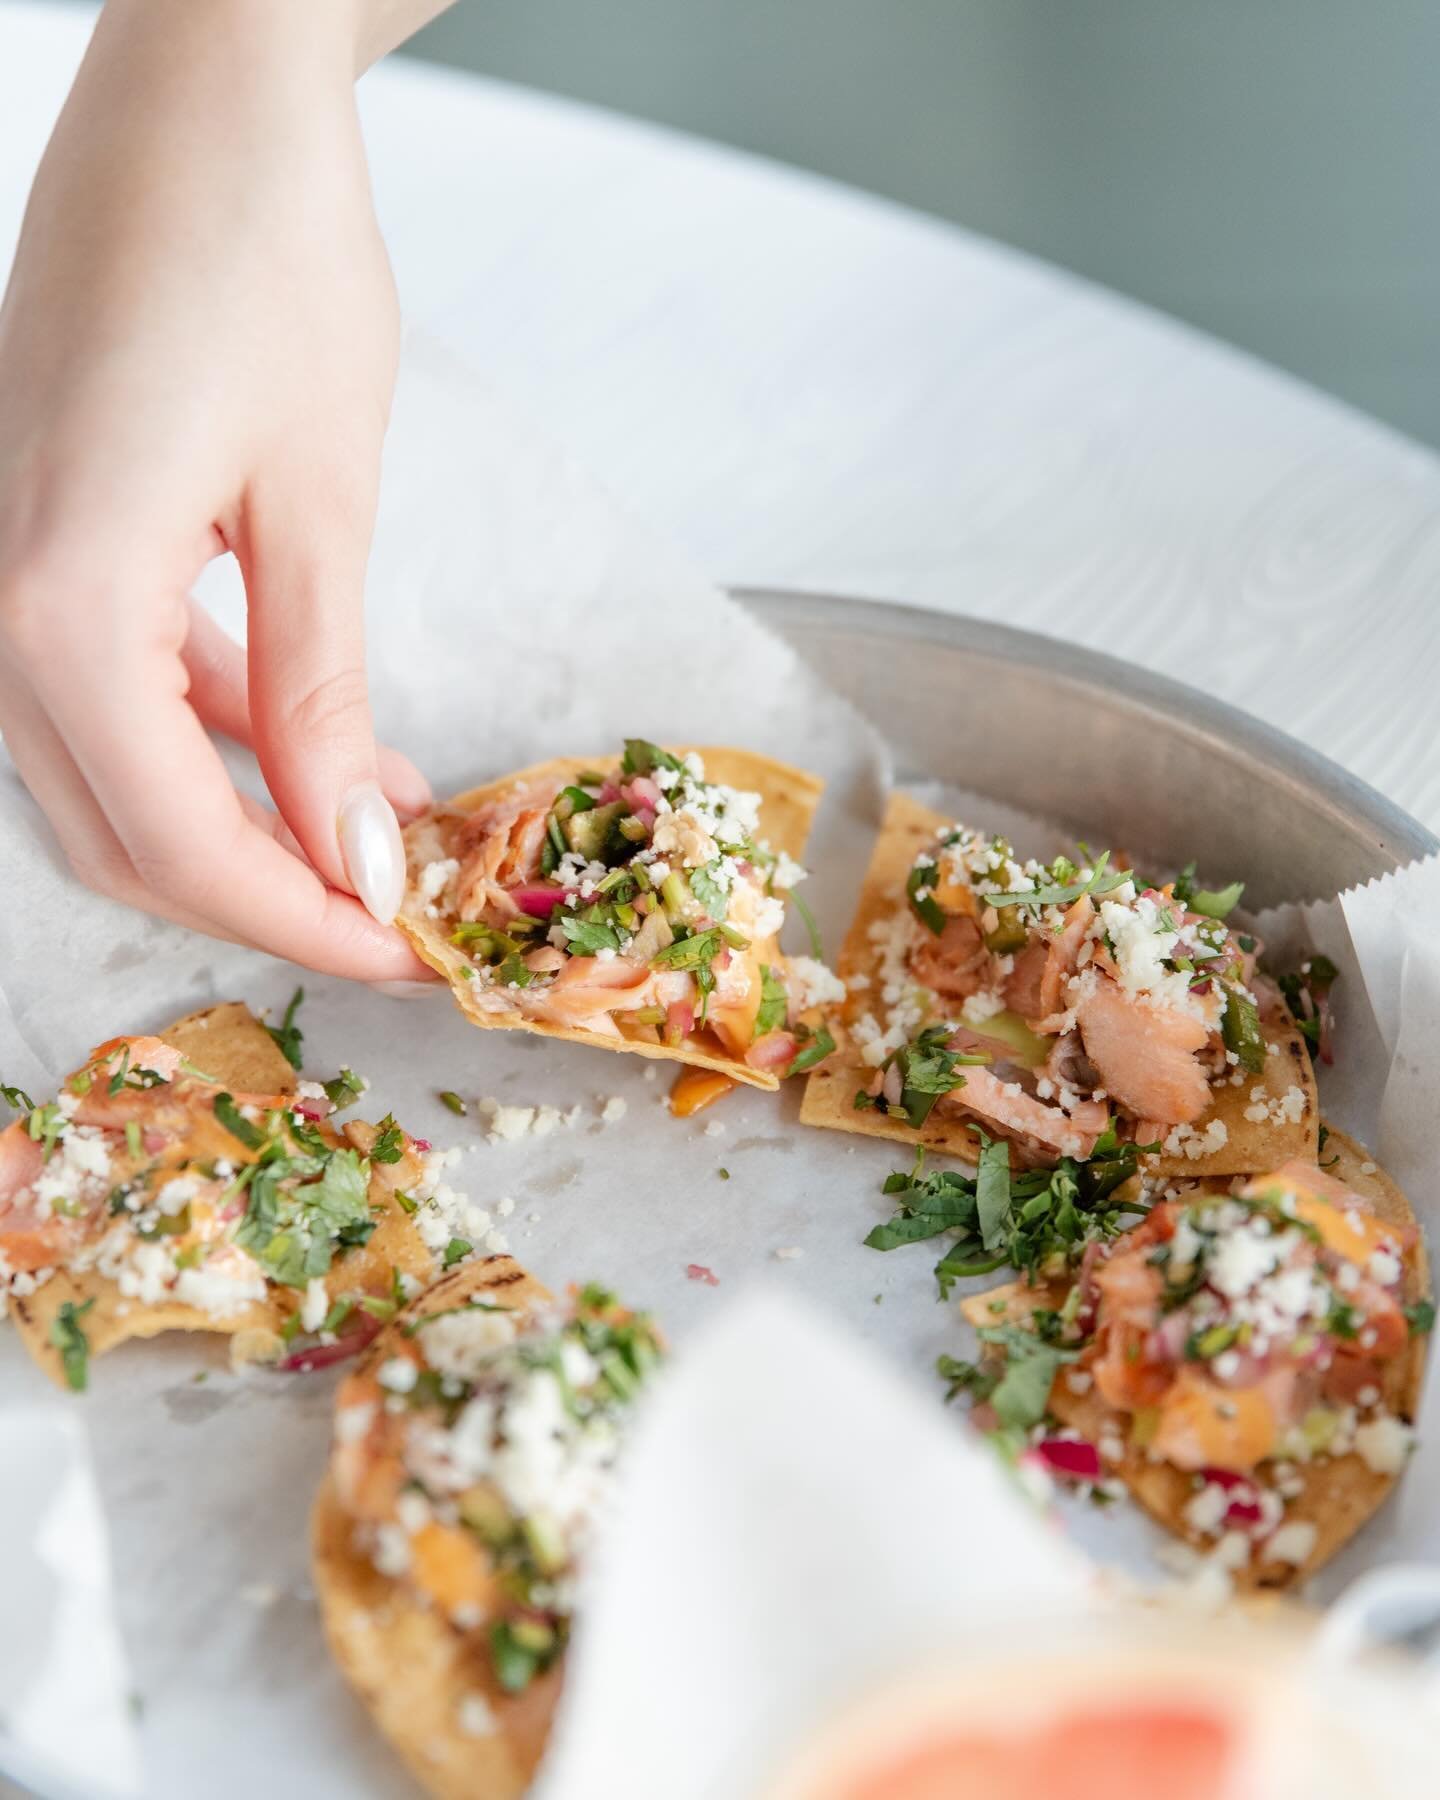 Starting off the week strong with our Totopos de Salm&oacute;n! House-smoked salmon, habanero-avocado mayo, chimichurri, chipotle mayo, &amp; queso fresco

Enjoy these at any of our pure locations.